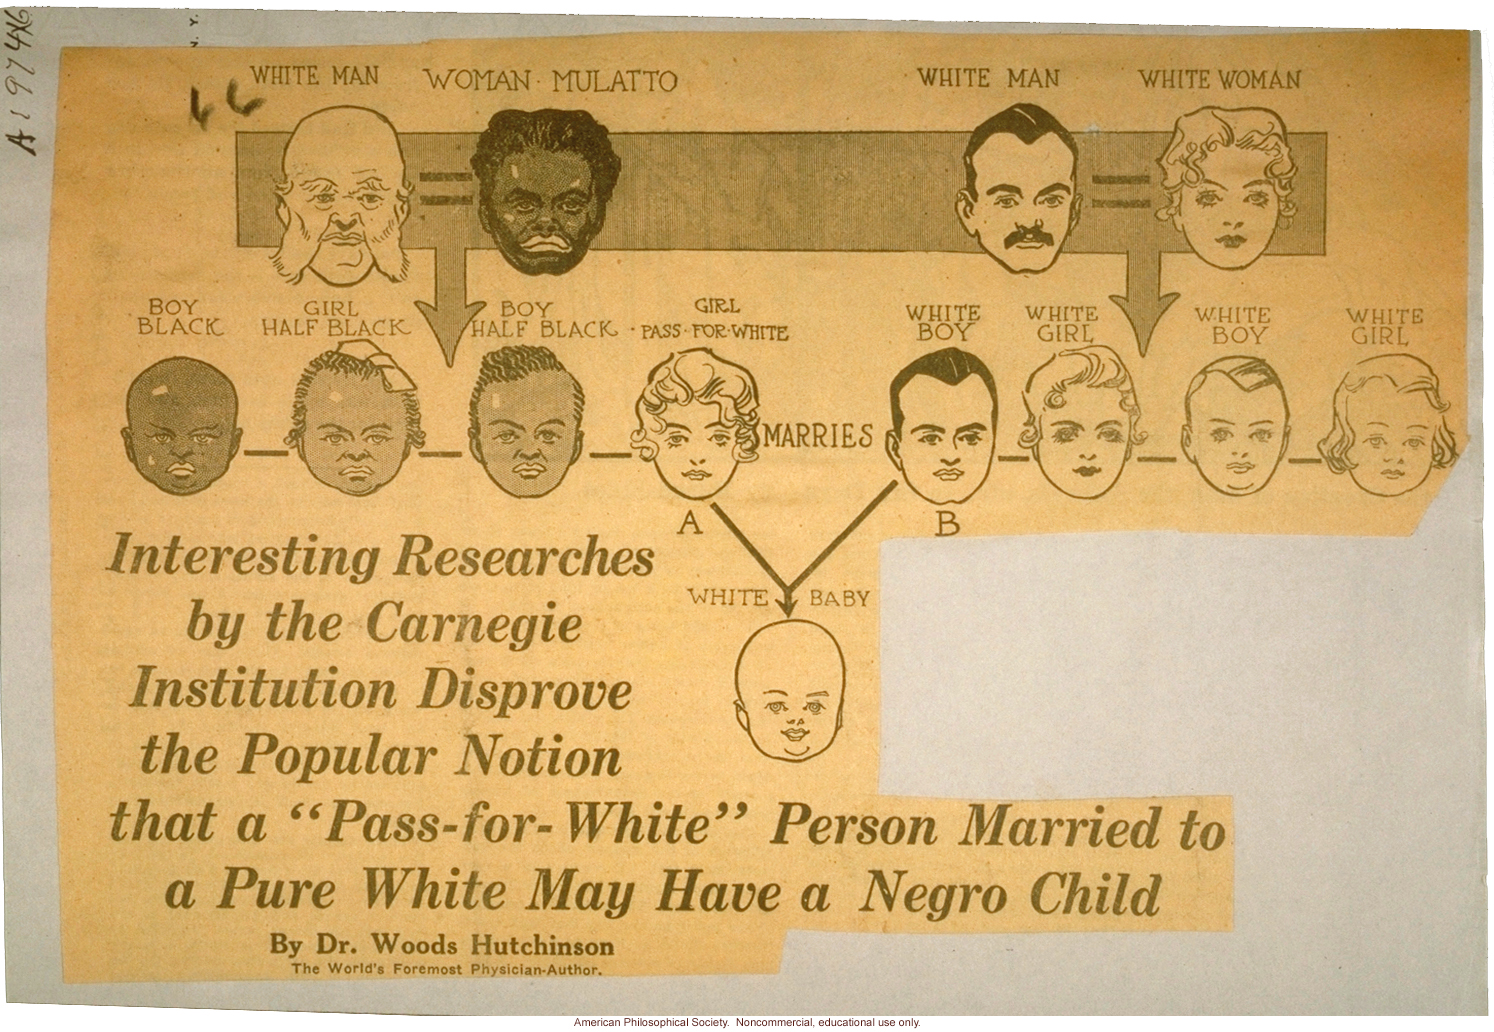 Carnegie Institution research 'disproving' &quote;the popular notion that a 'pass-for-white' person married to a pure white may have a negro child&quote;